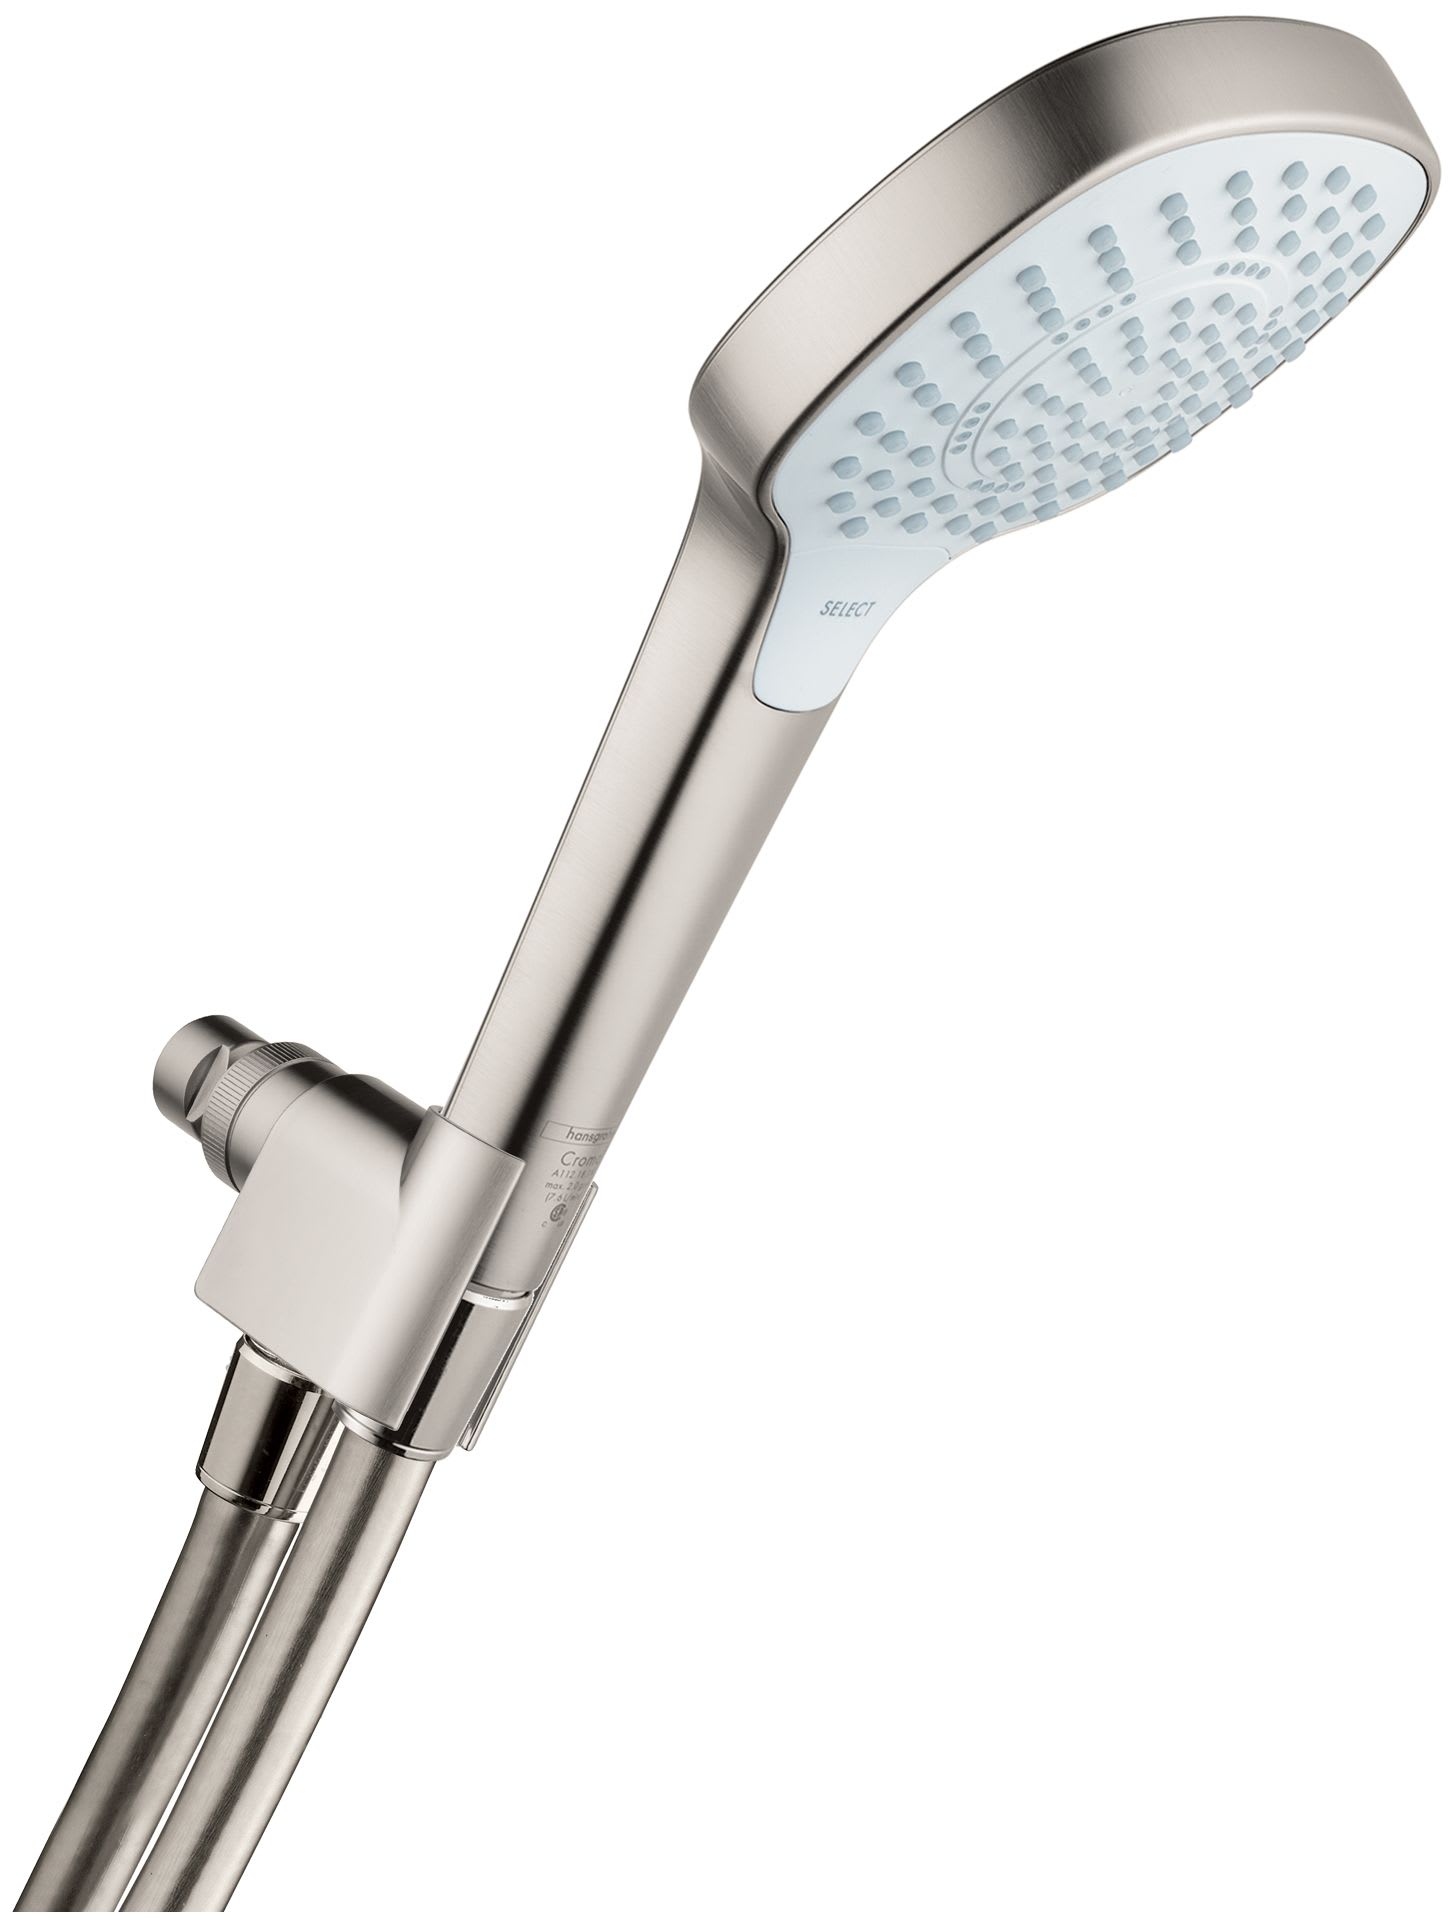 Eeuwigdurend Verbieden Seminarie Hansgrohe 04789820 Brushed Nickel Croma Select E 1.75 GPM Multi Function  Hand Shower Package with Select and QuickClean Technologies - Includes Hose  and Hand Shower Holder - FaucetDirect.com